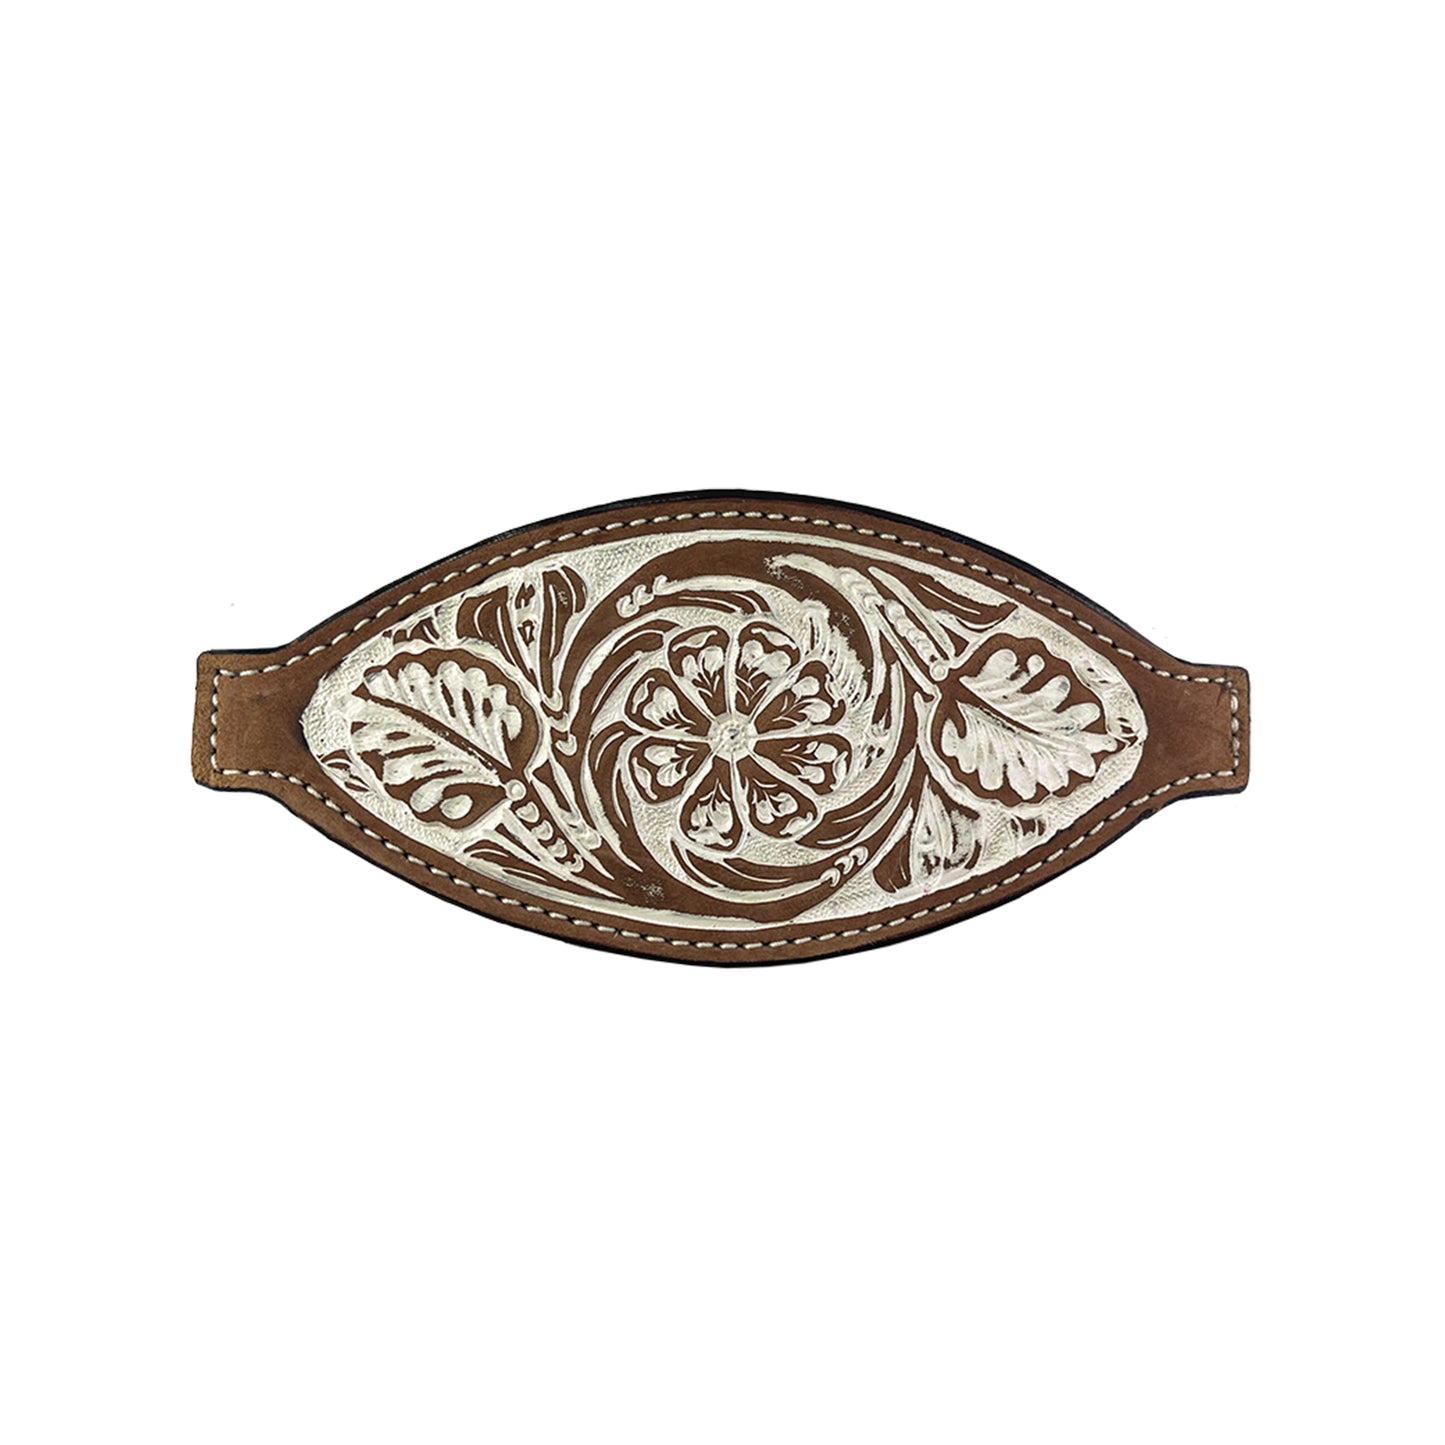 Bronc nose chocolate leather floral tooled with ivory rustic background paint.